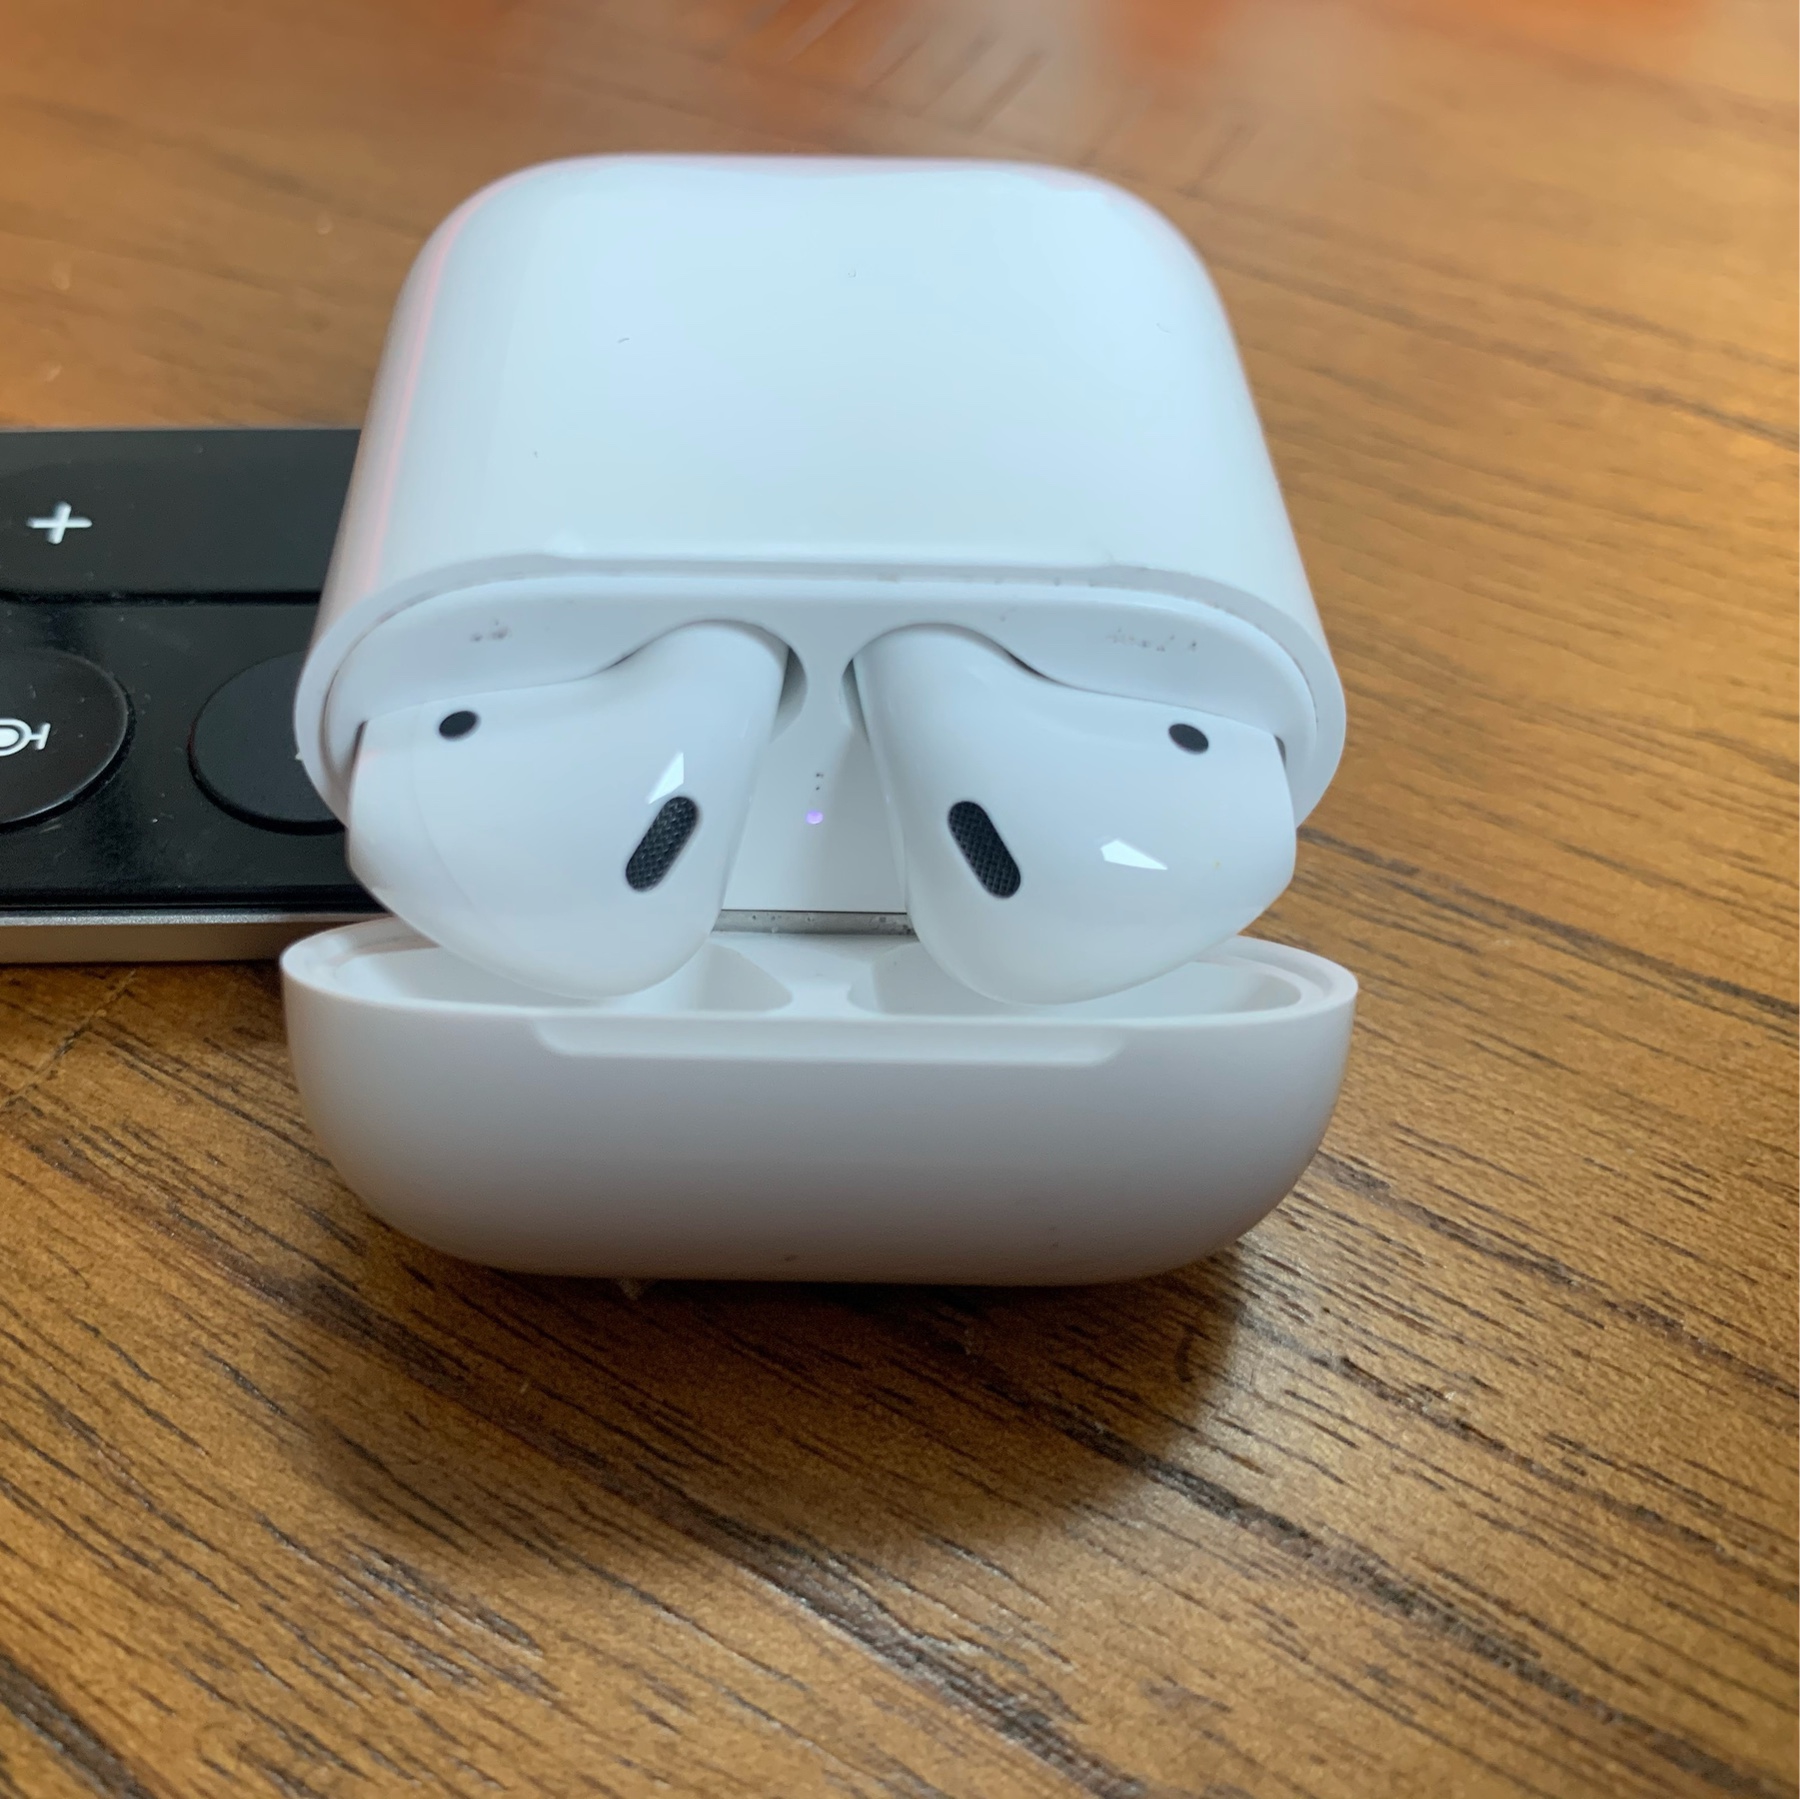 My brand new Airpods (second gen) in my original charging case, sitting open on a wooden table.